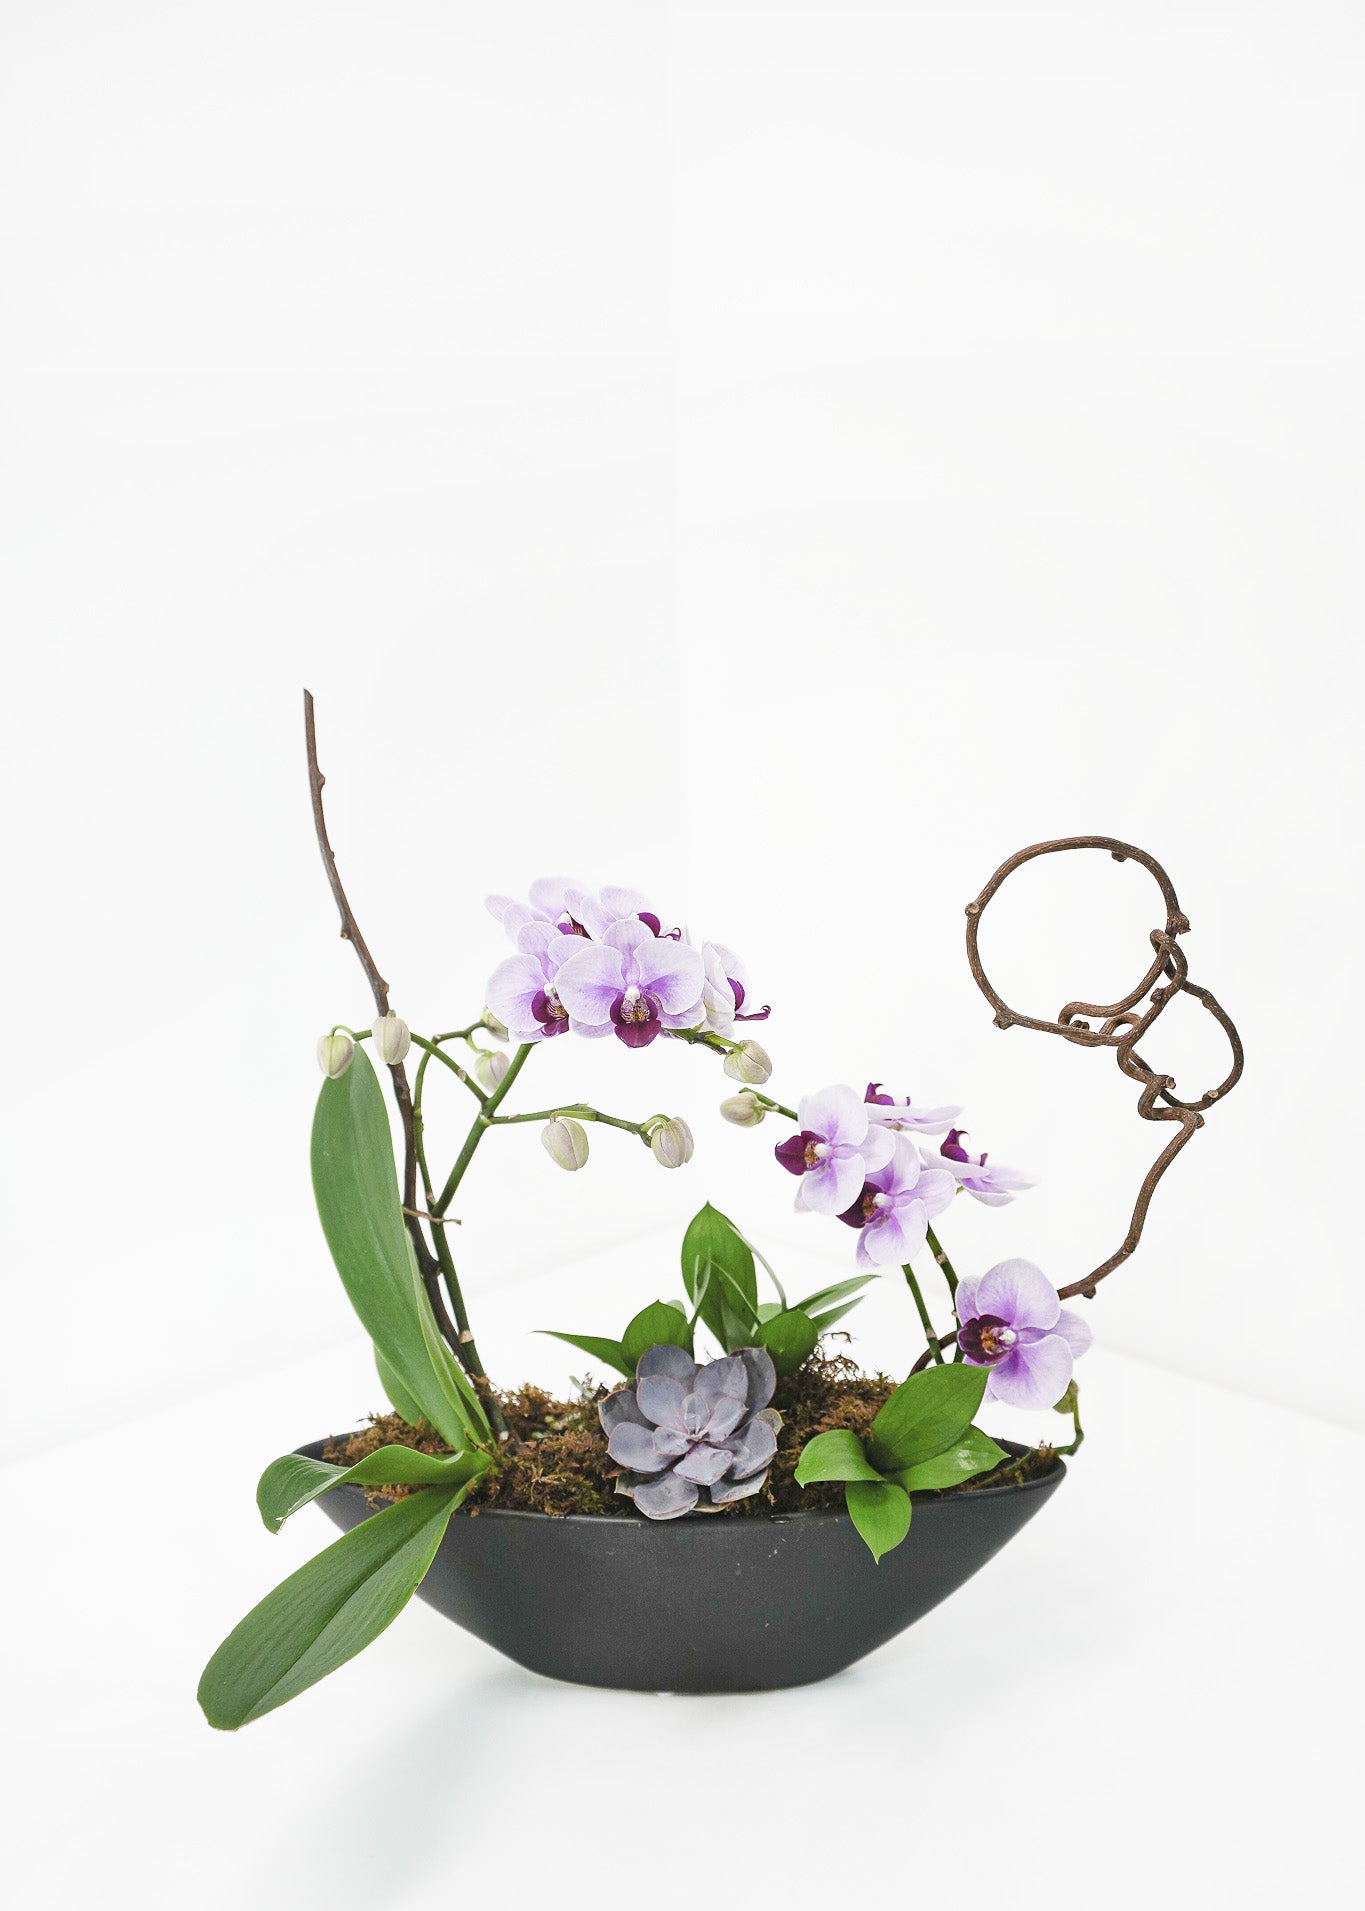 Small Pink Orchid Arrangement